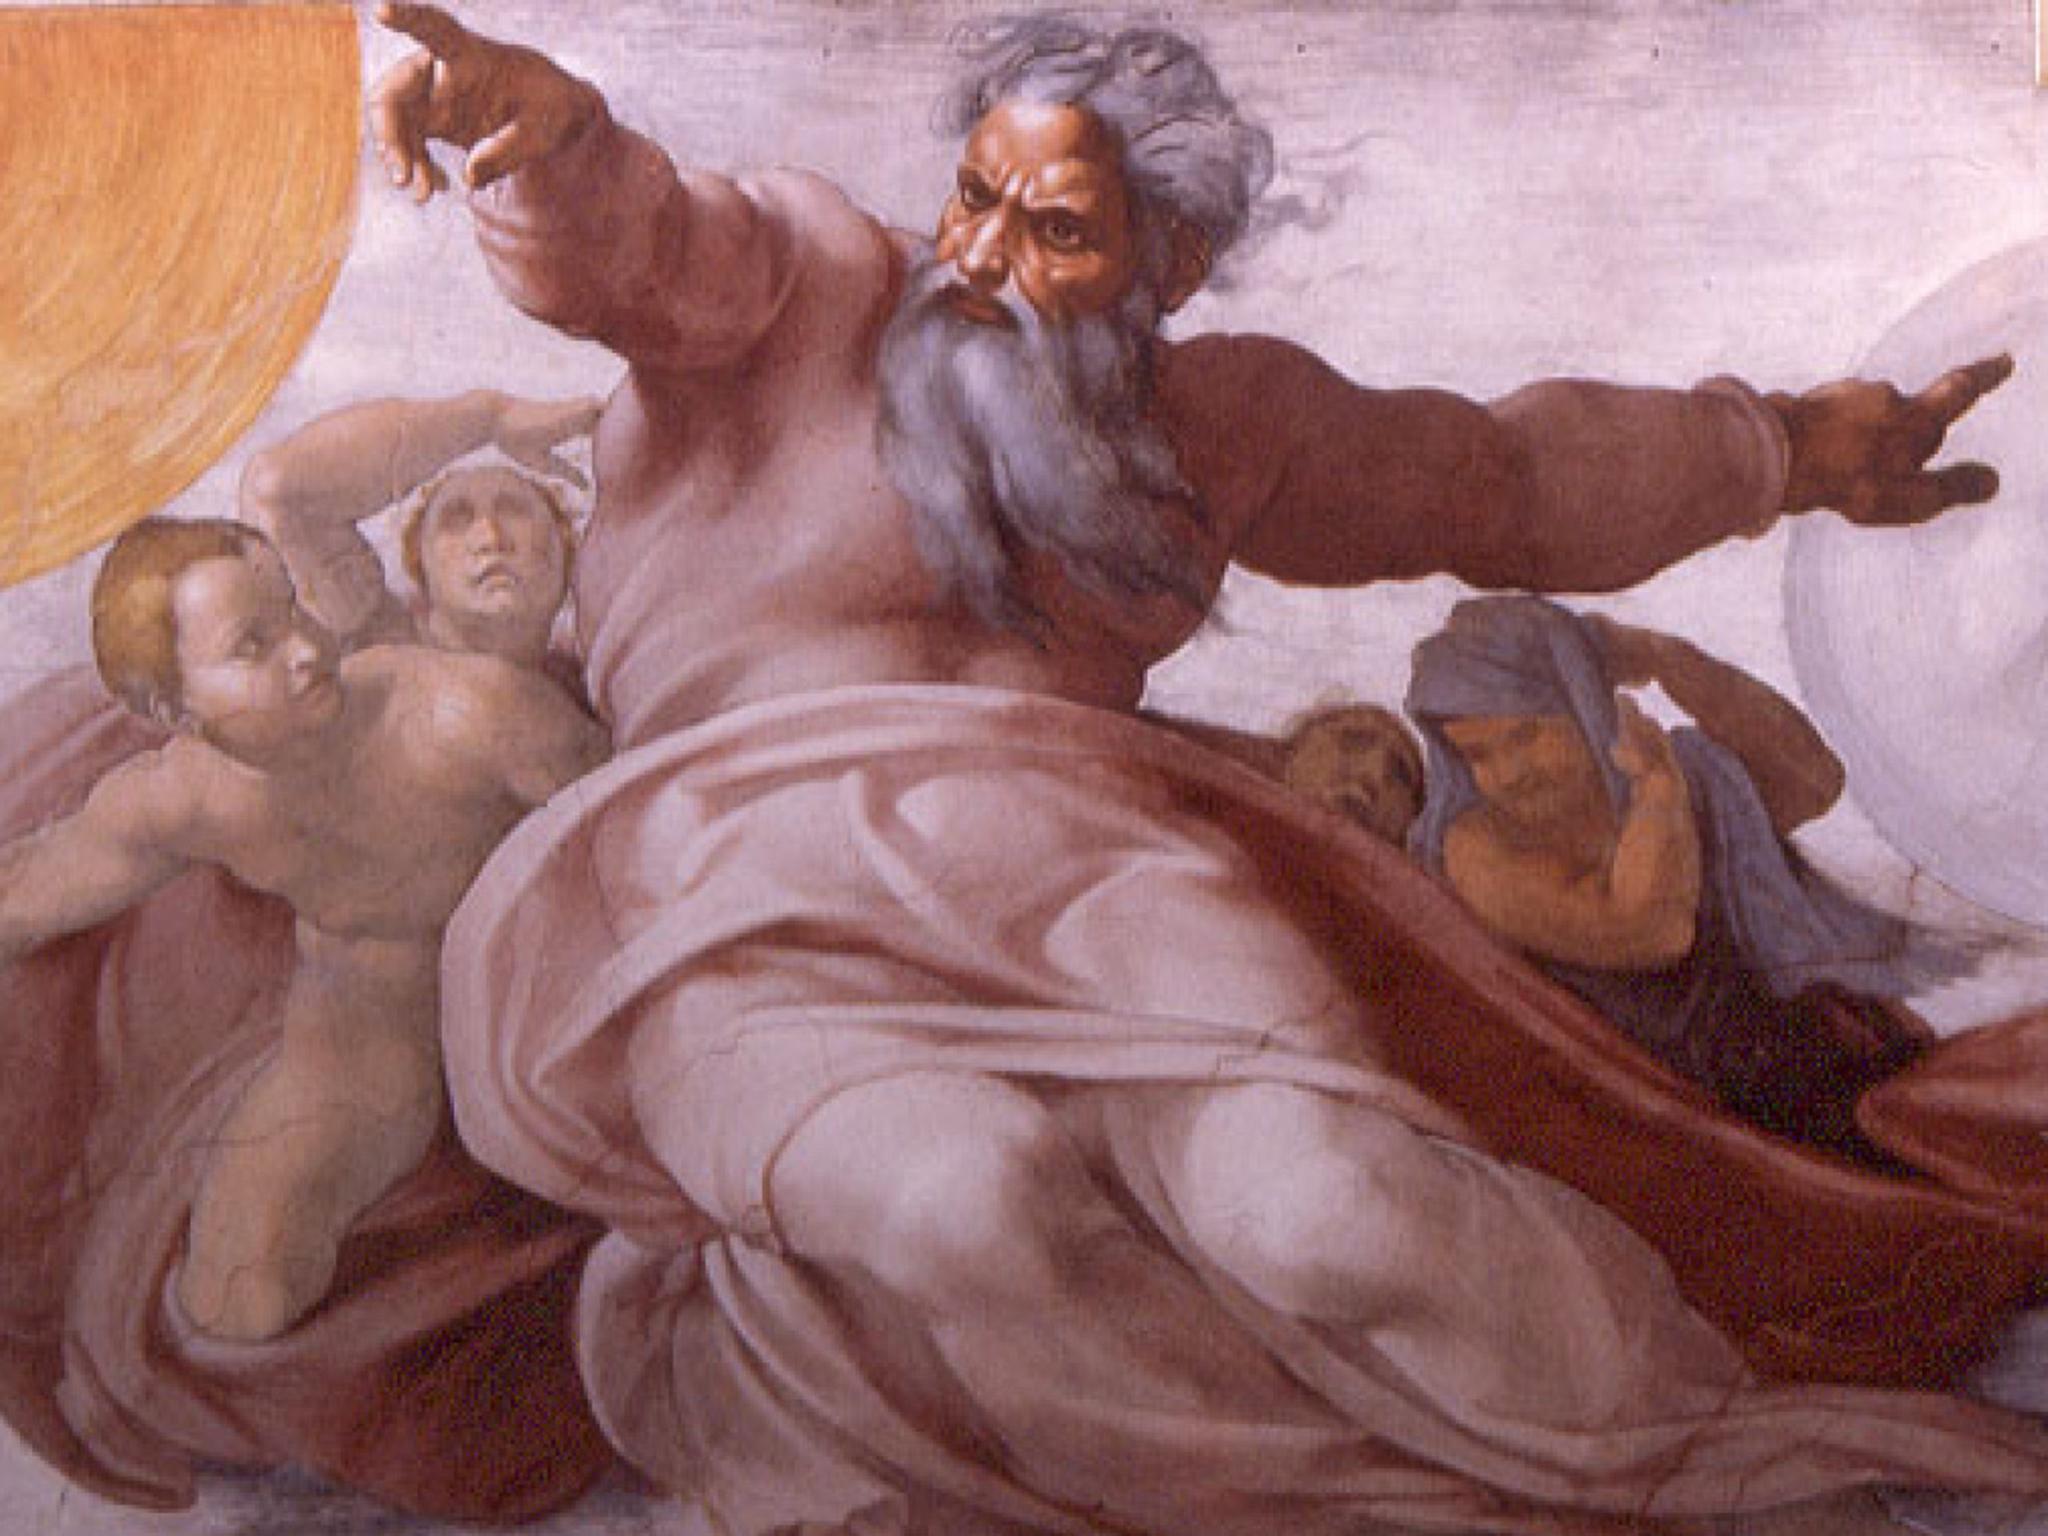 God as depicted in Michelangelo's fresco ‘The Creation of the Heavenly Bodies’ in the Sistine Chapel